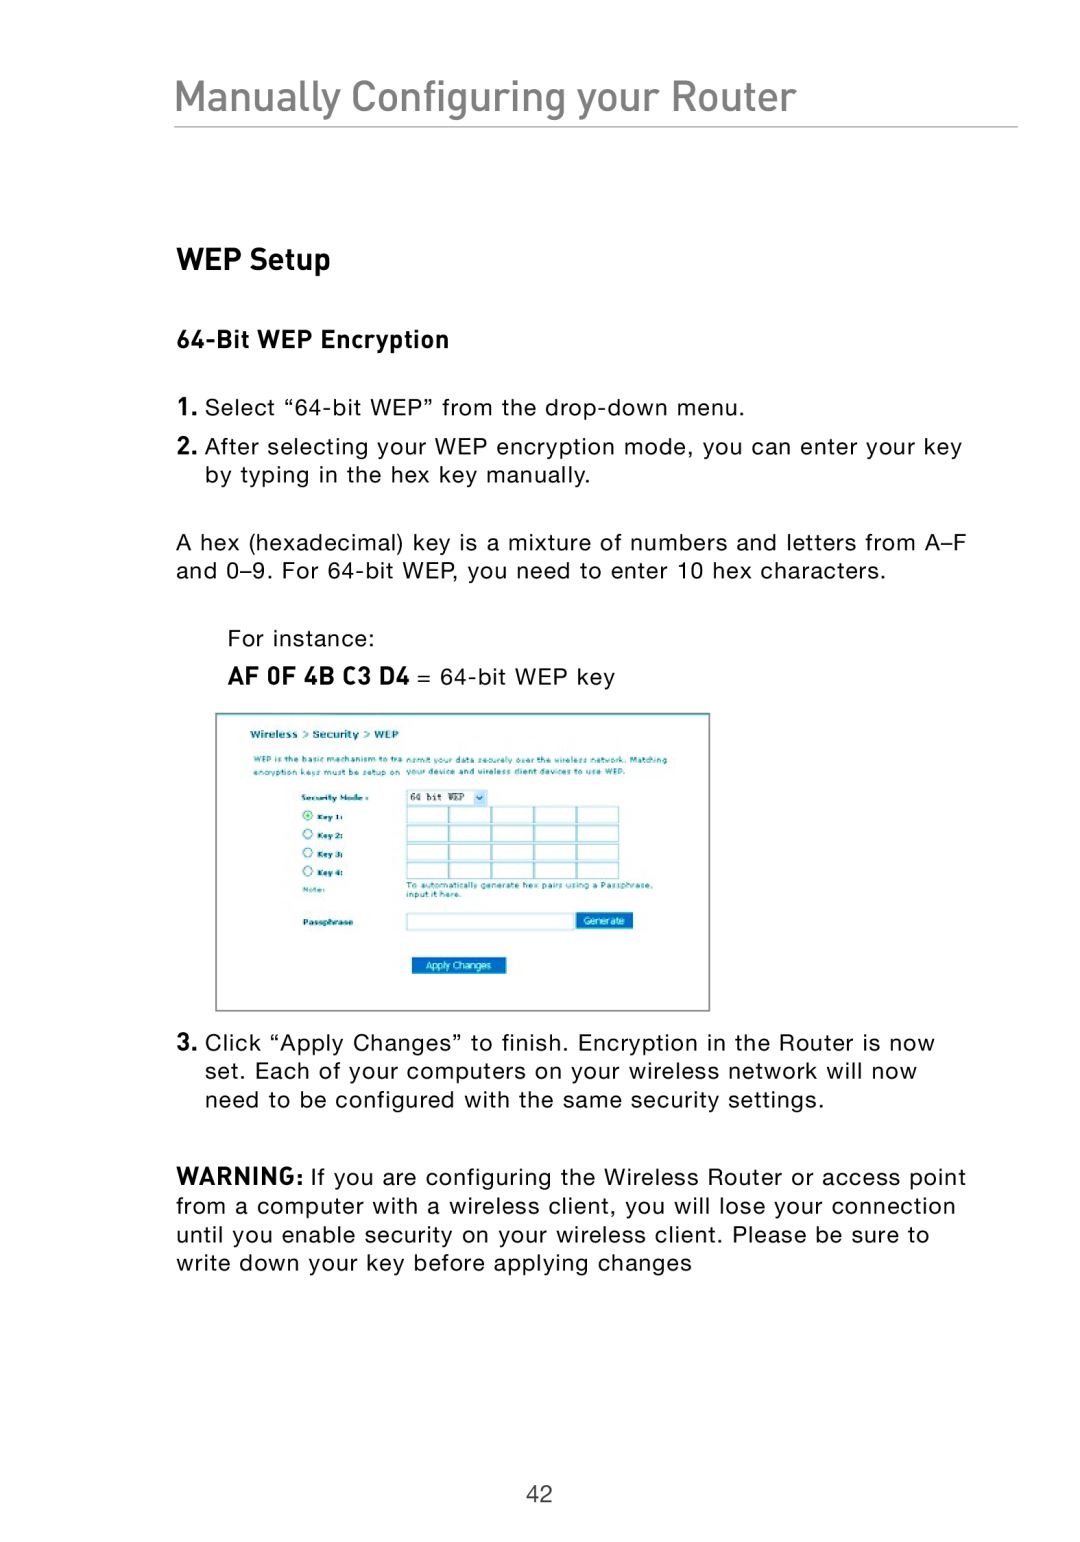 Belkin Pre-N manual WEP Setup, Bit WEP Encryption, Manually Configuring your Router 